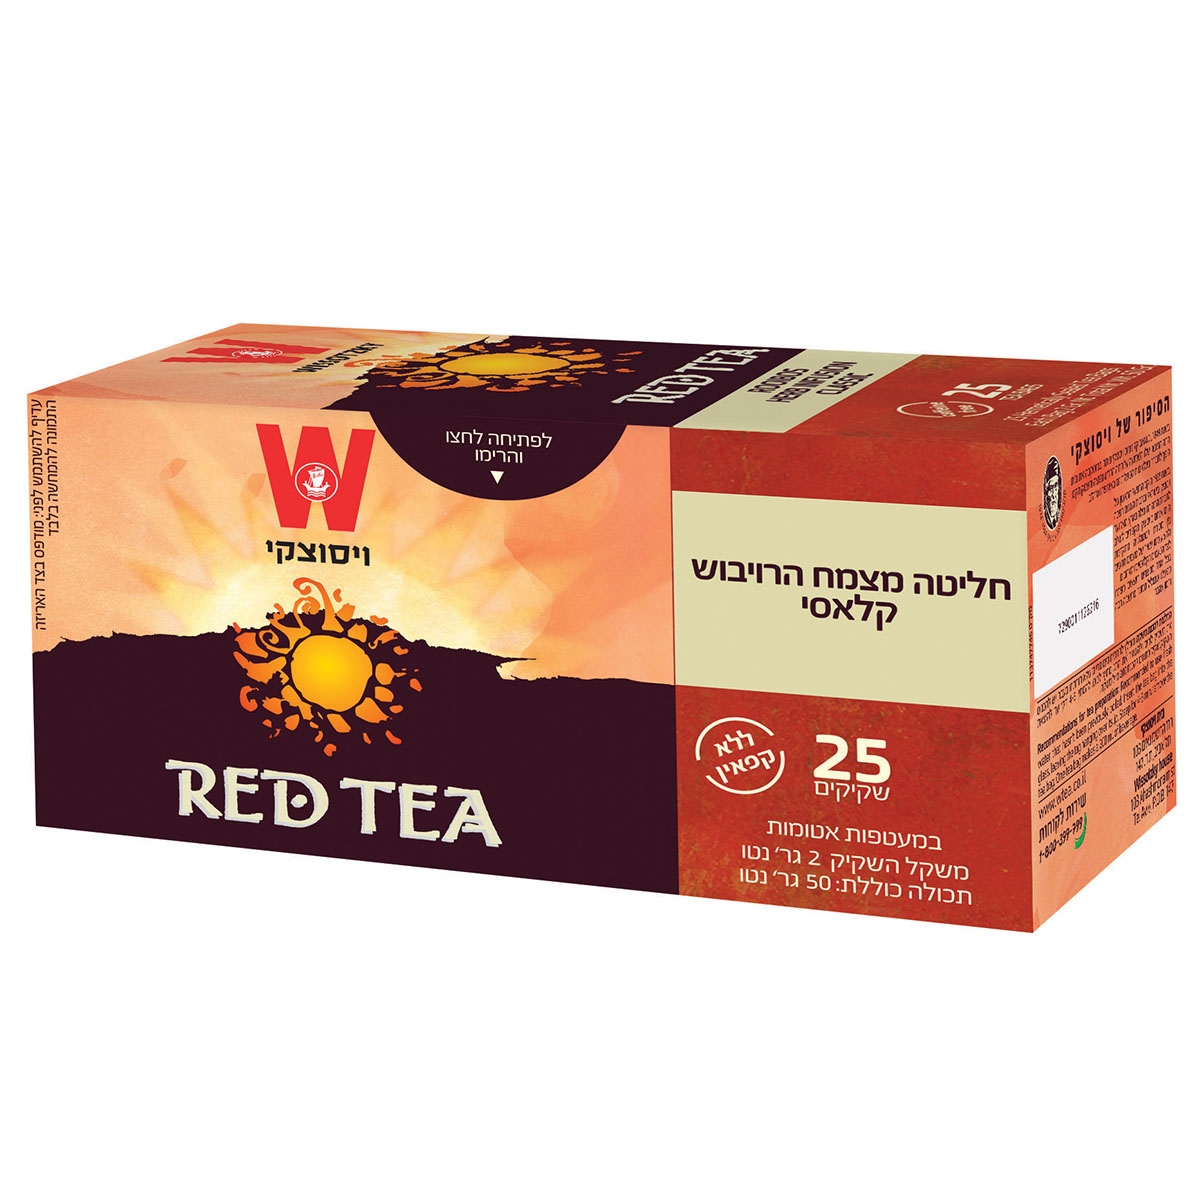 Wissotzky Red Tea. Rooibos Herb Infusion  - Classic Rooibos - 1